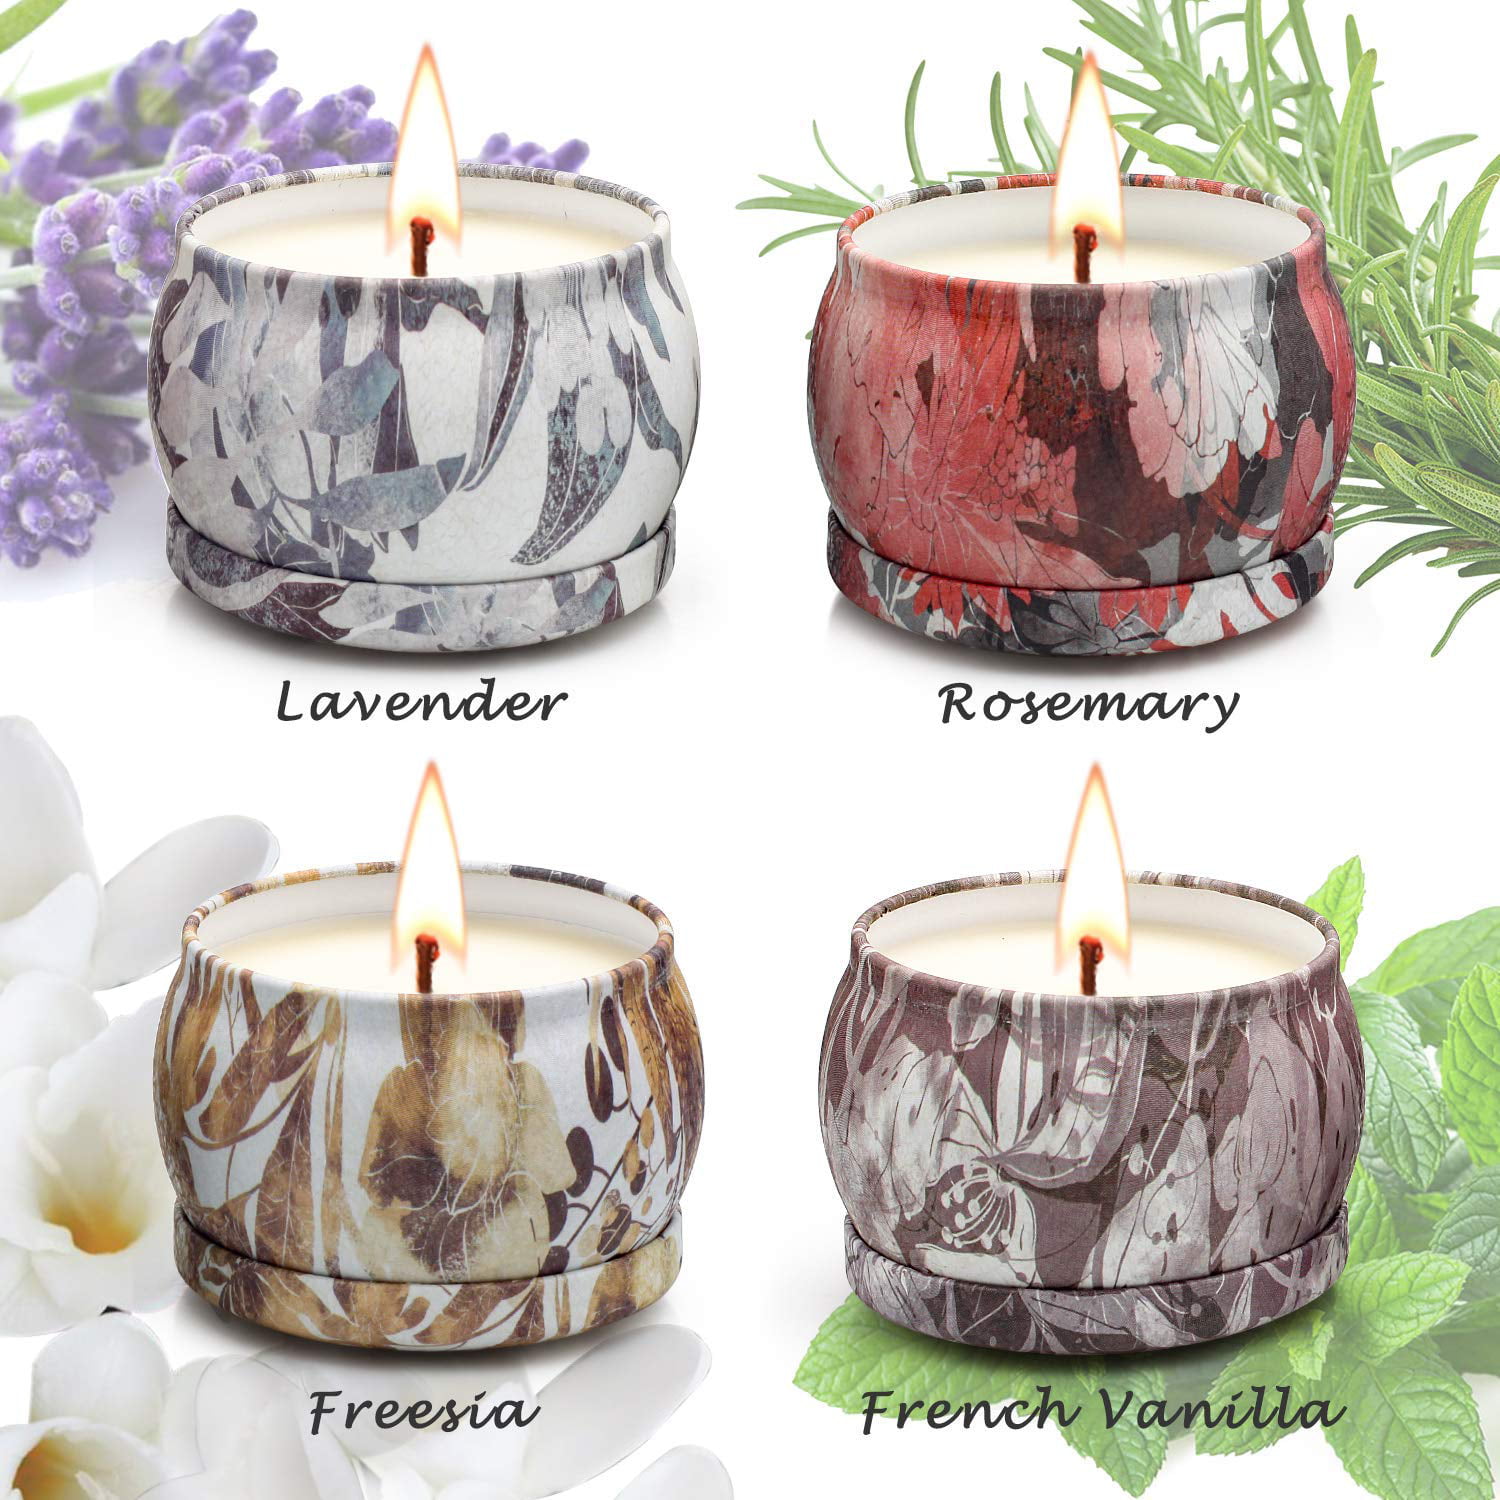 Scented Candles Set for Home Stress Relief Gifts for Birthday Valentines Day Mothers Day Anniversary Thanksgiving Christmas etc. Gifts for Women